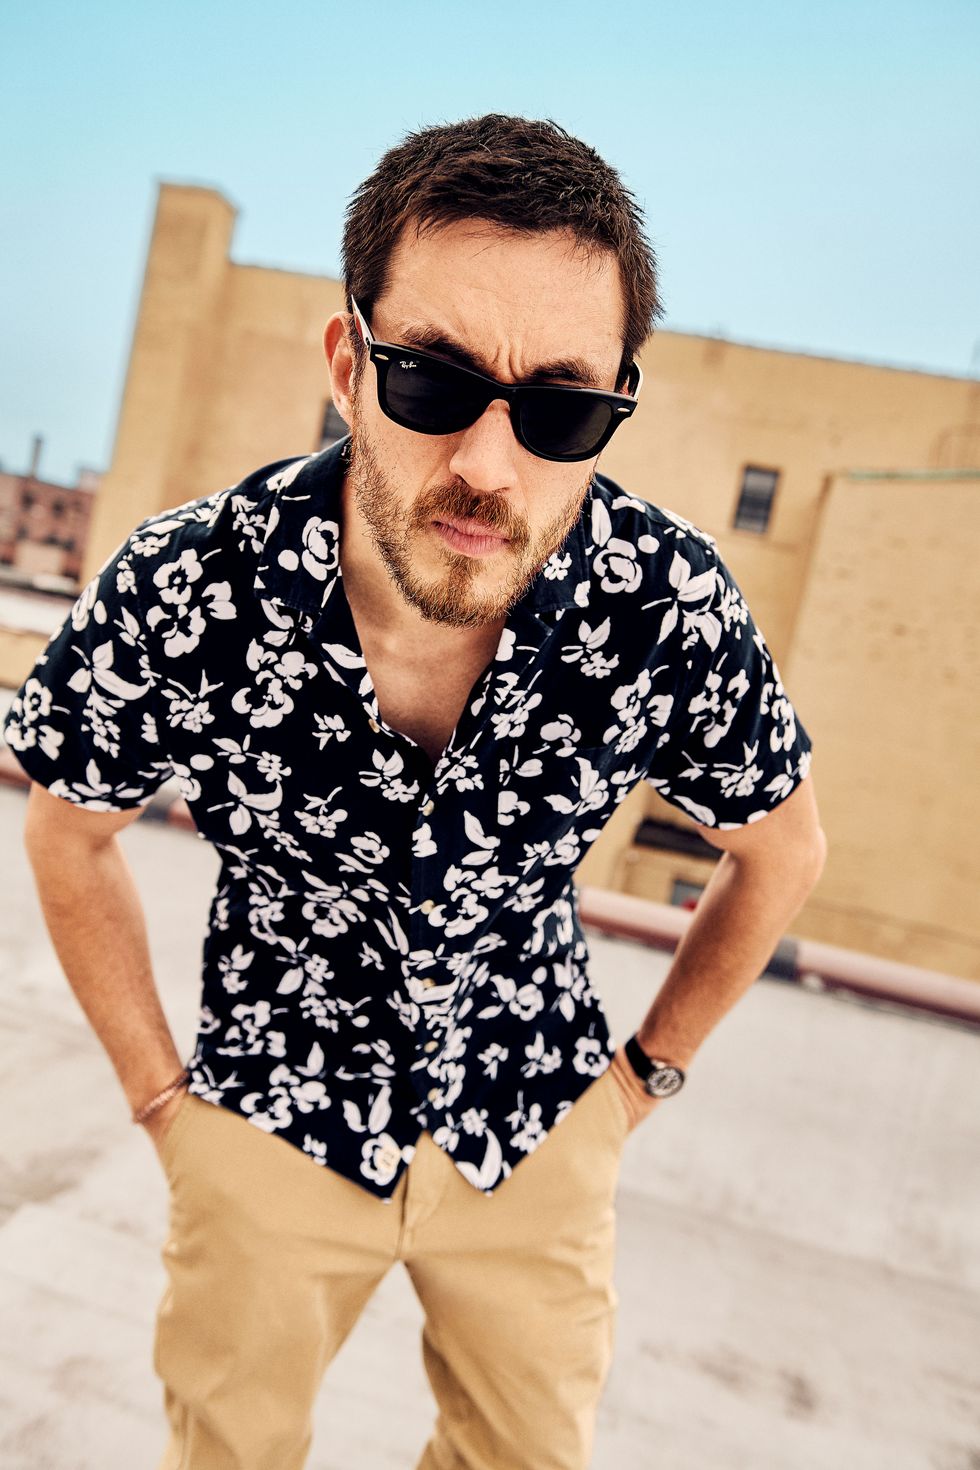 The Best Summer Clothes for Men, Worn by Bullet Train Star Andrew Koji